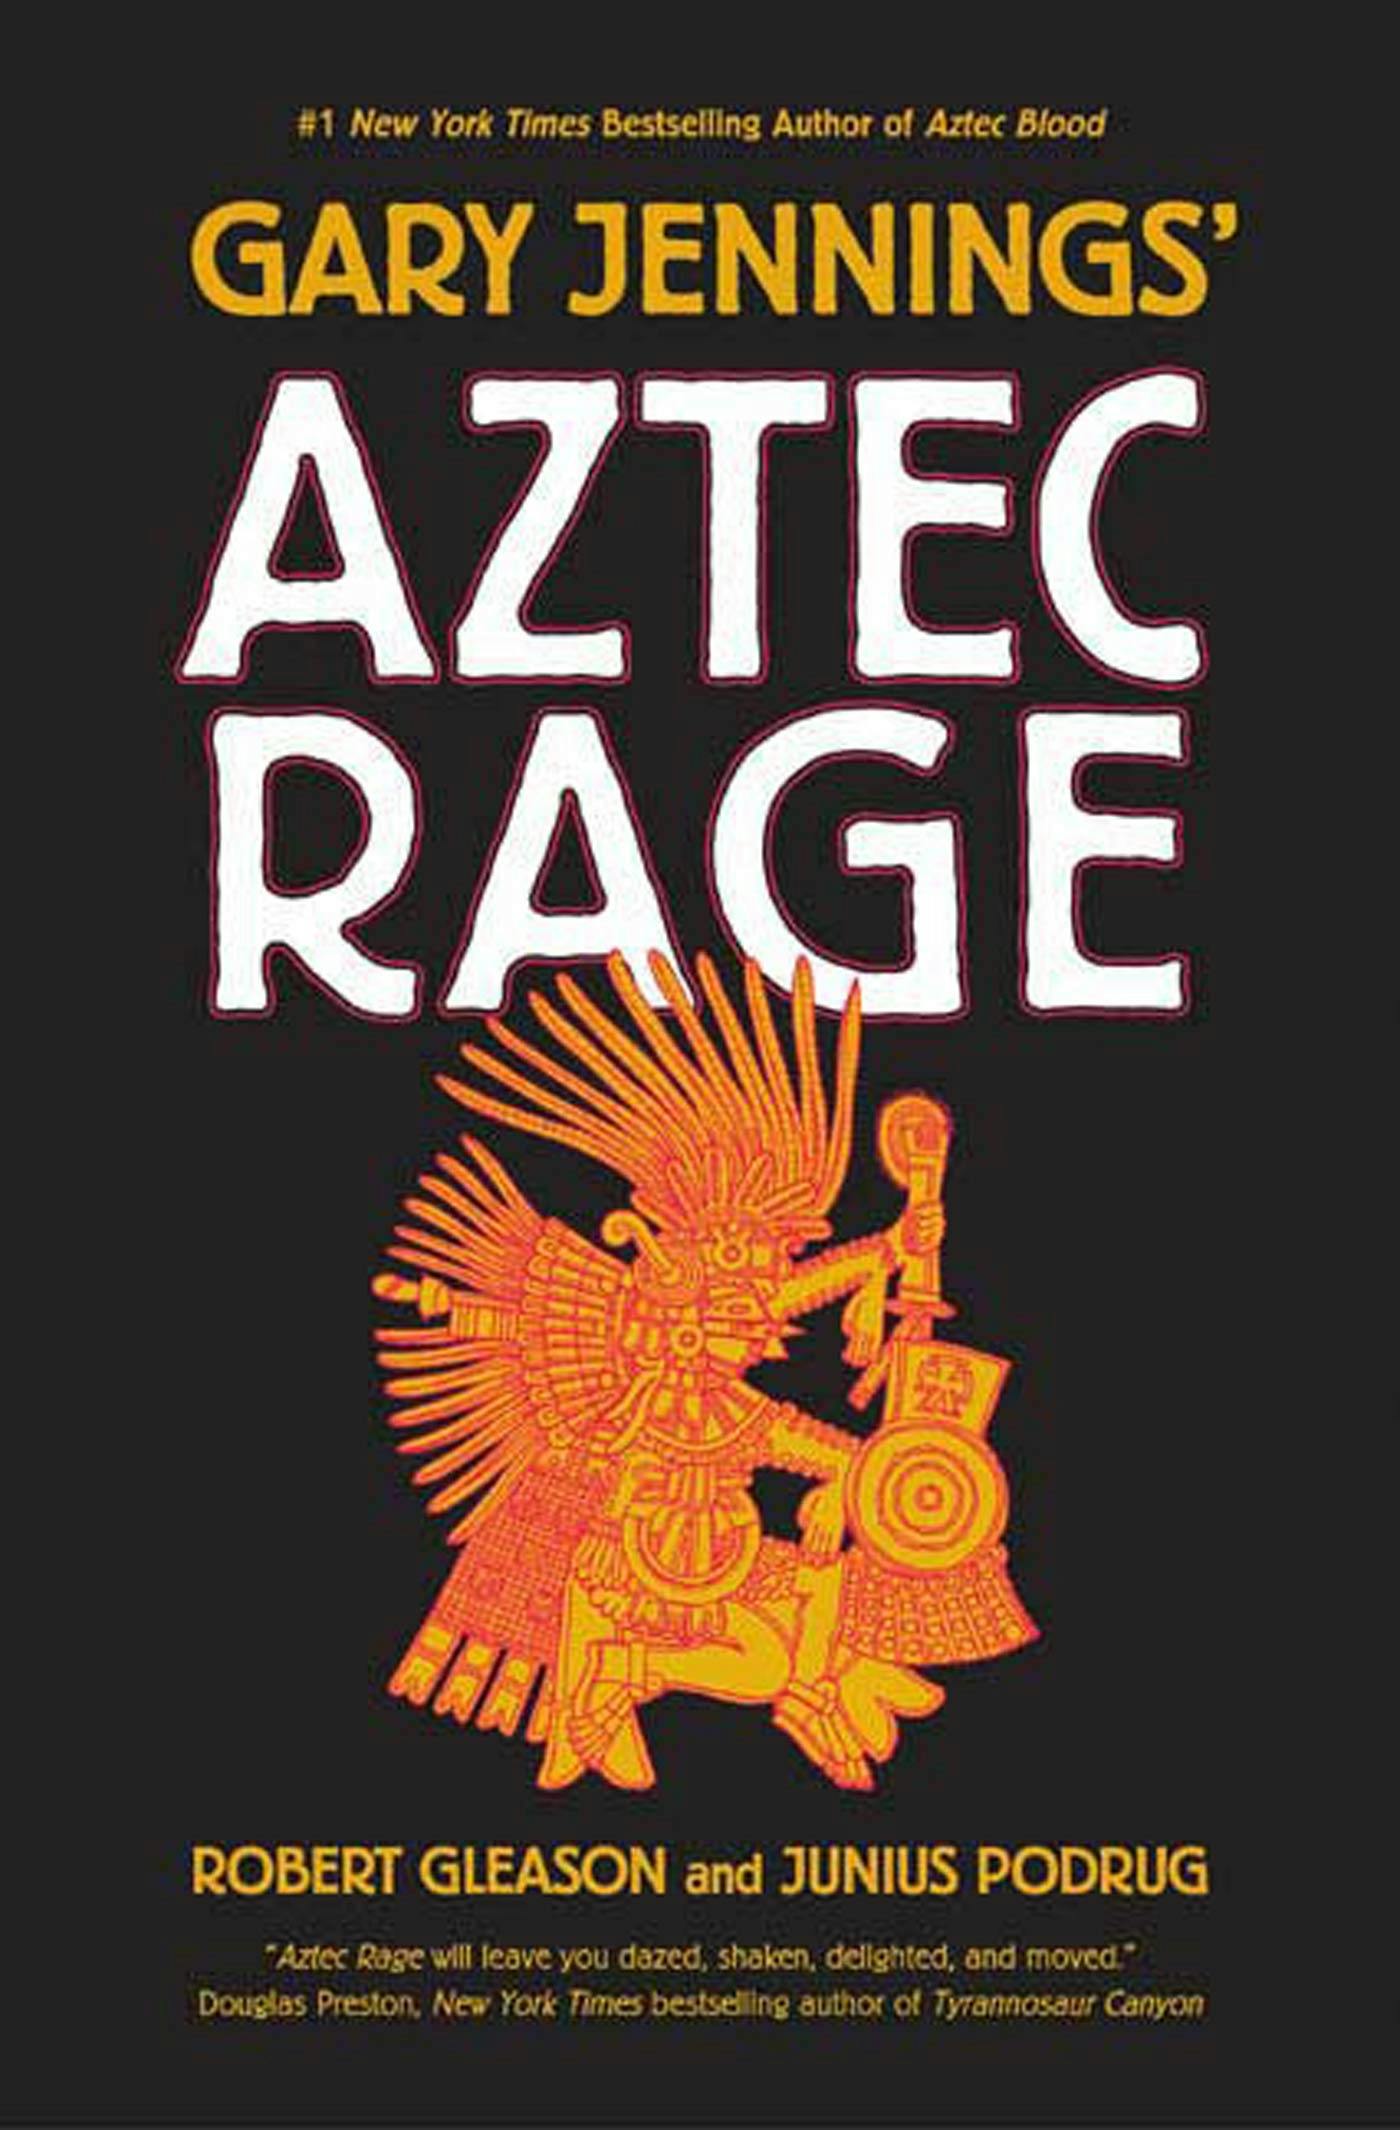 Cover for the book titled as: Aztec Rage